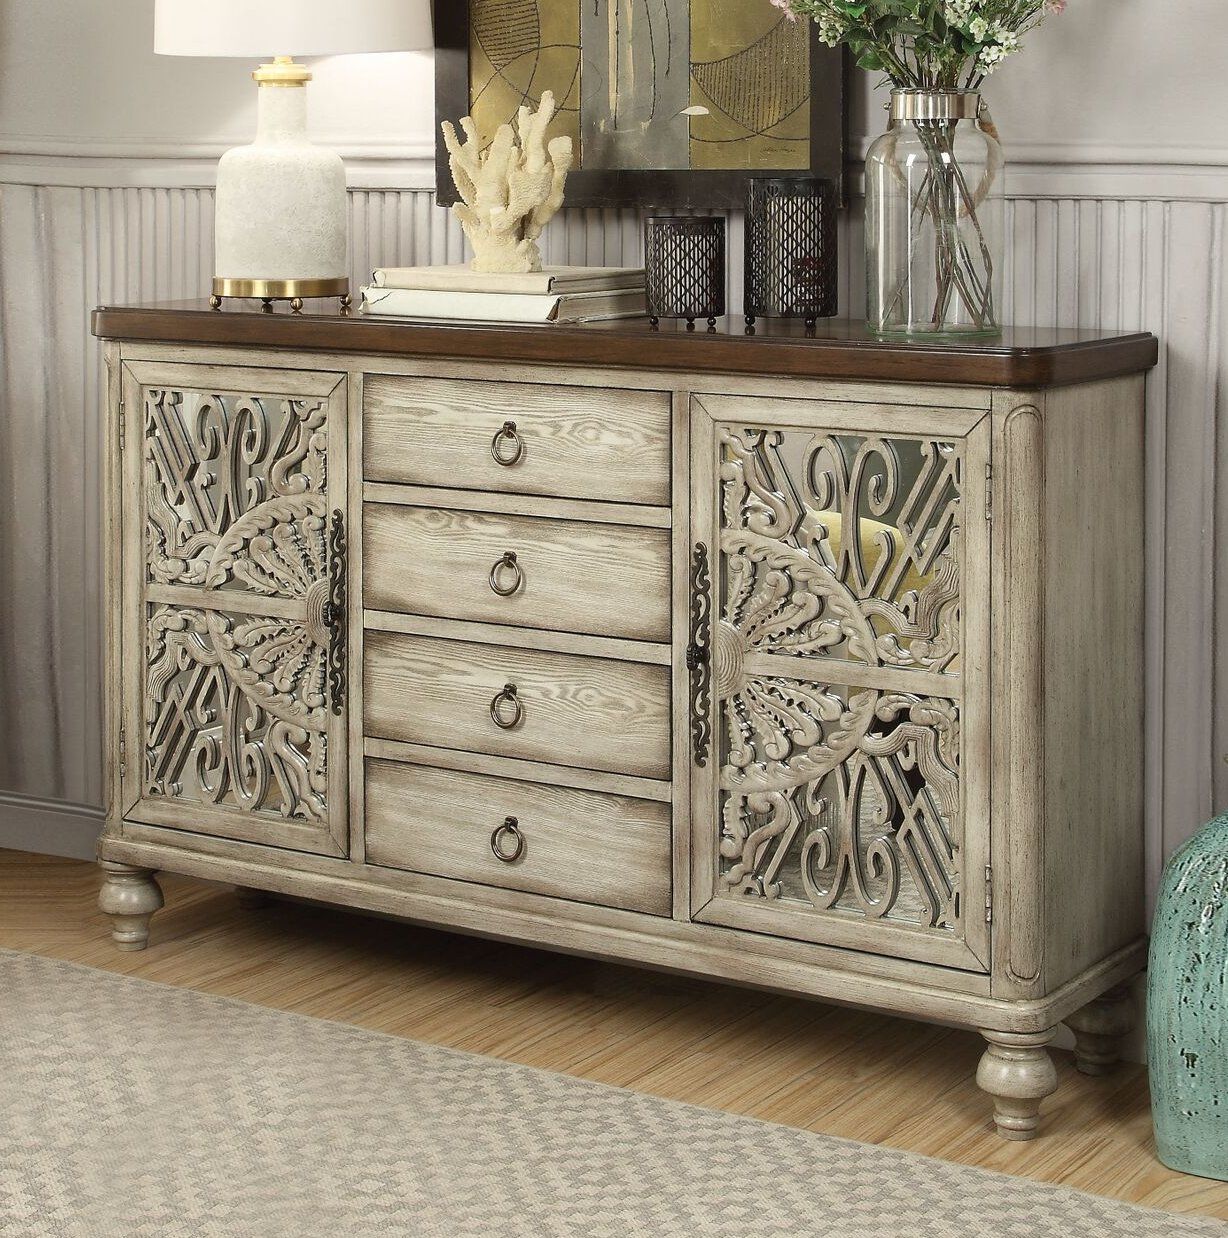 Antique White Sideboard Buffet | Wayfair (View 10 of 20)